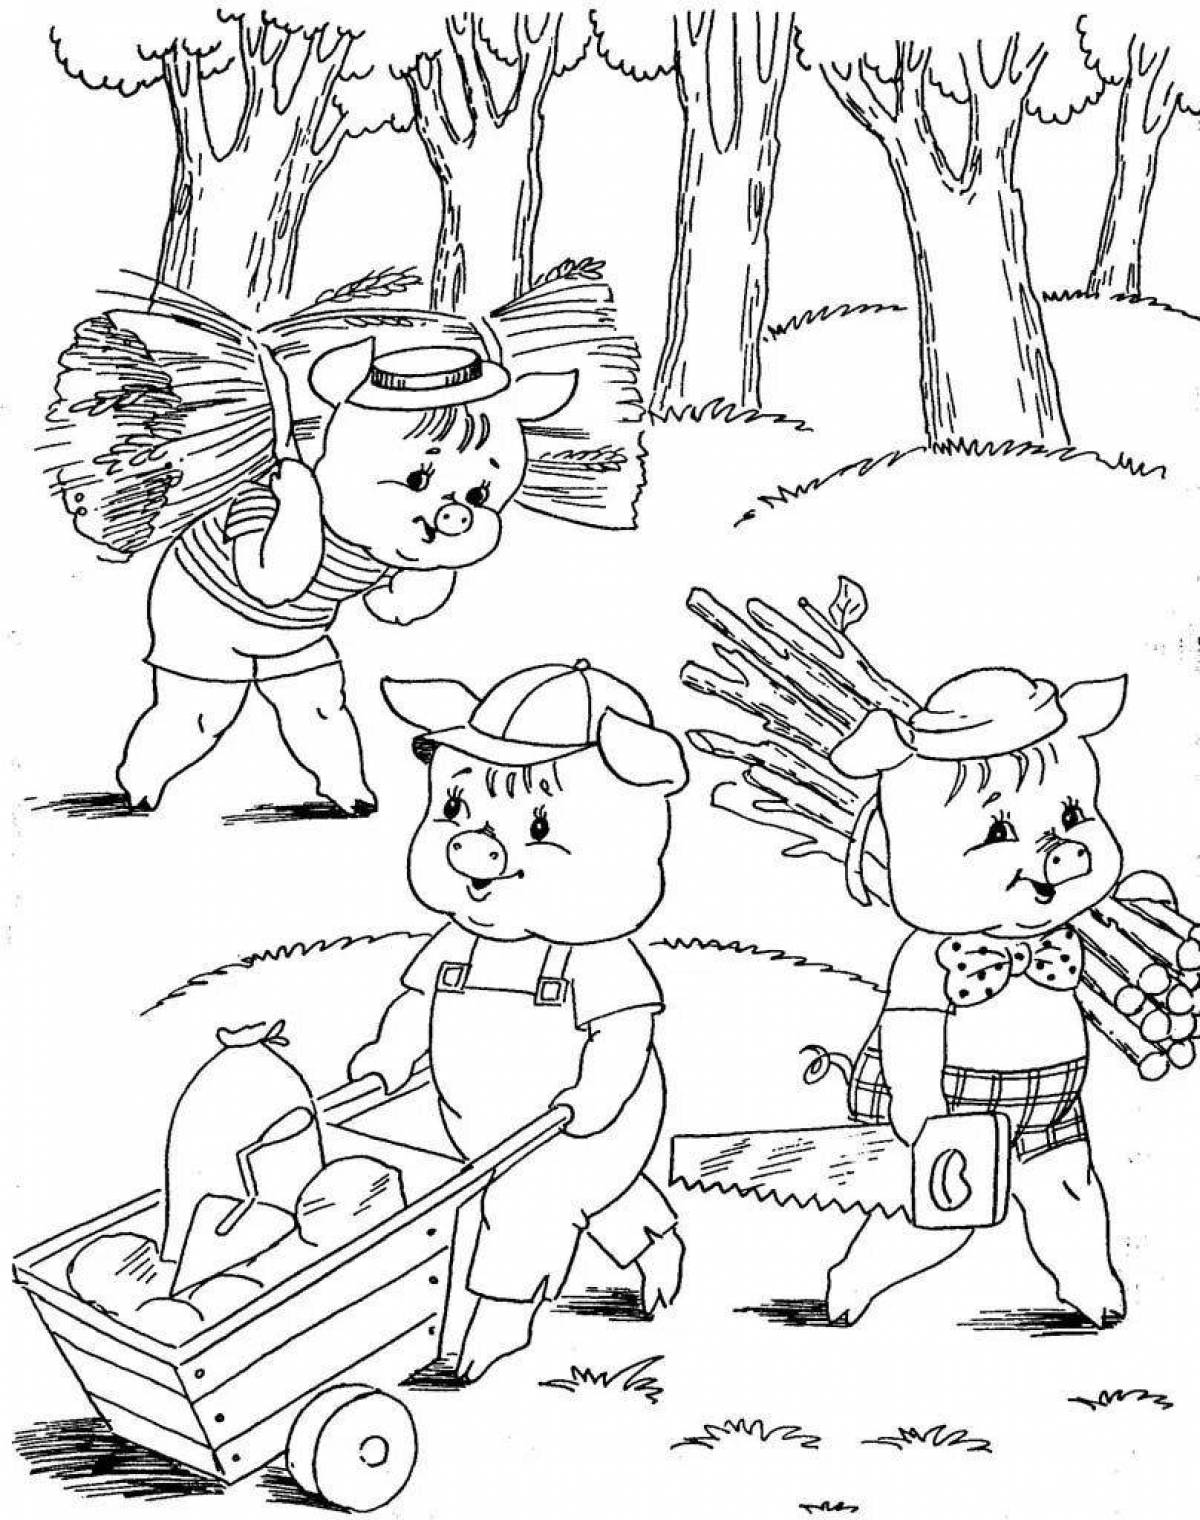 The incredible tale of the three little pigs